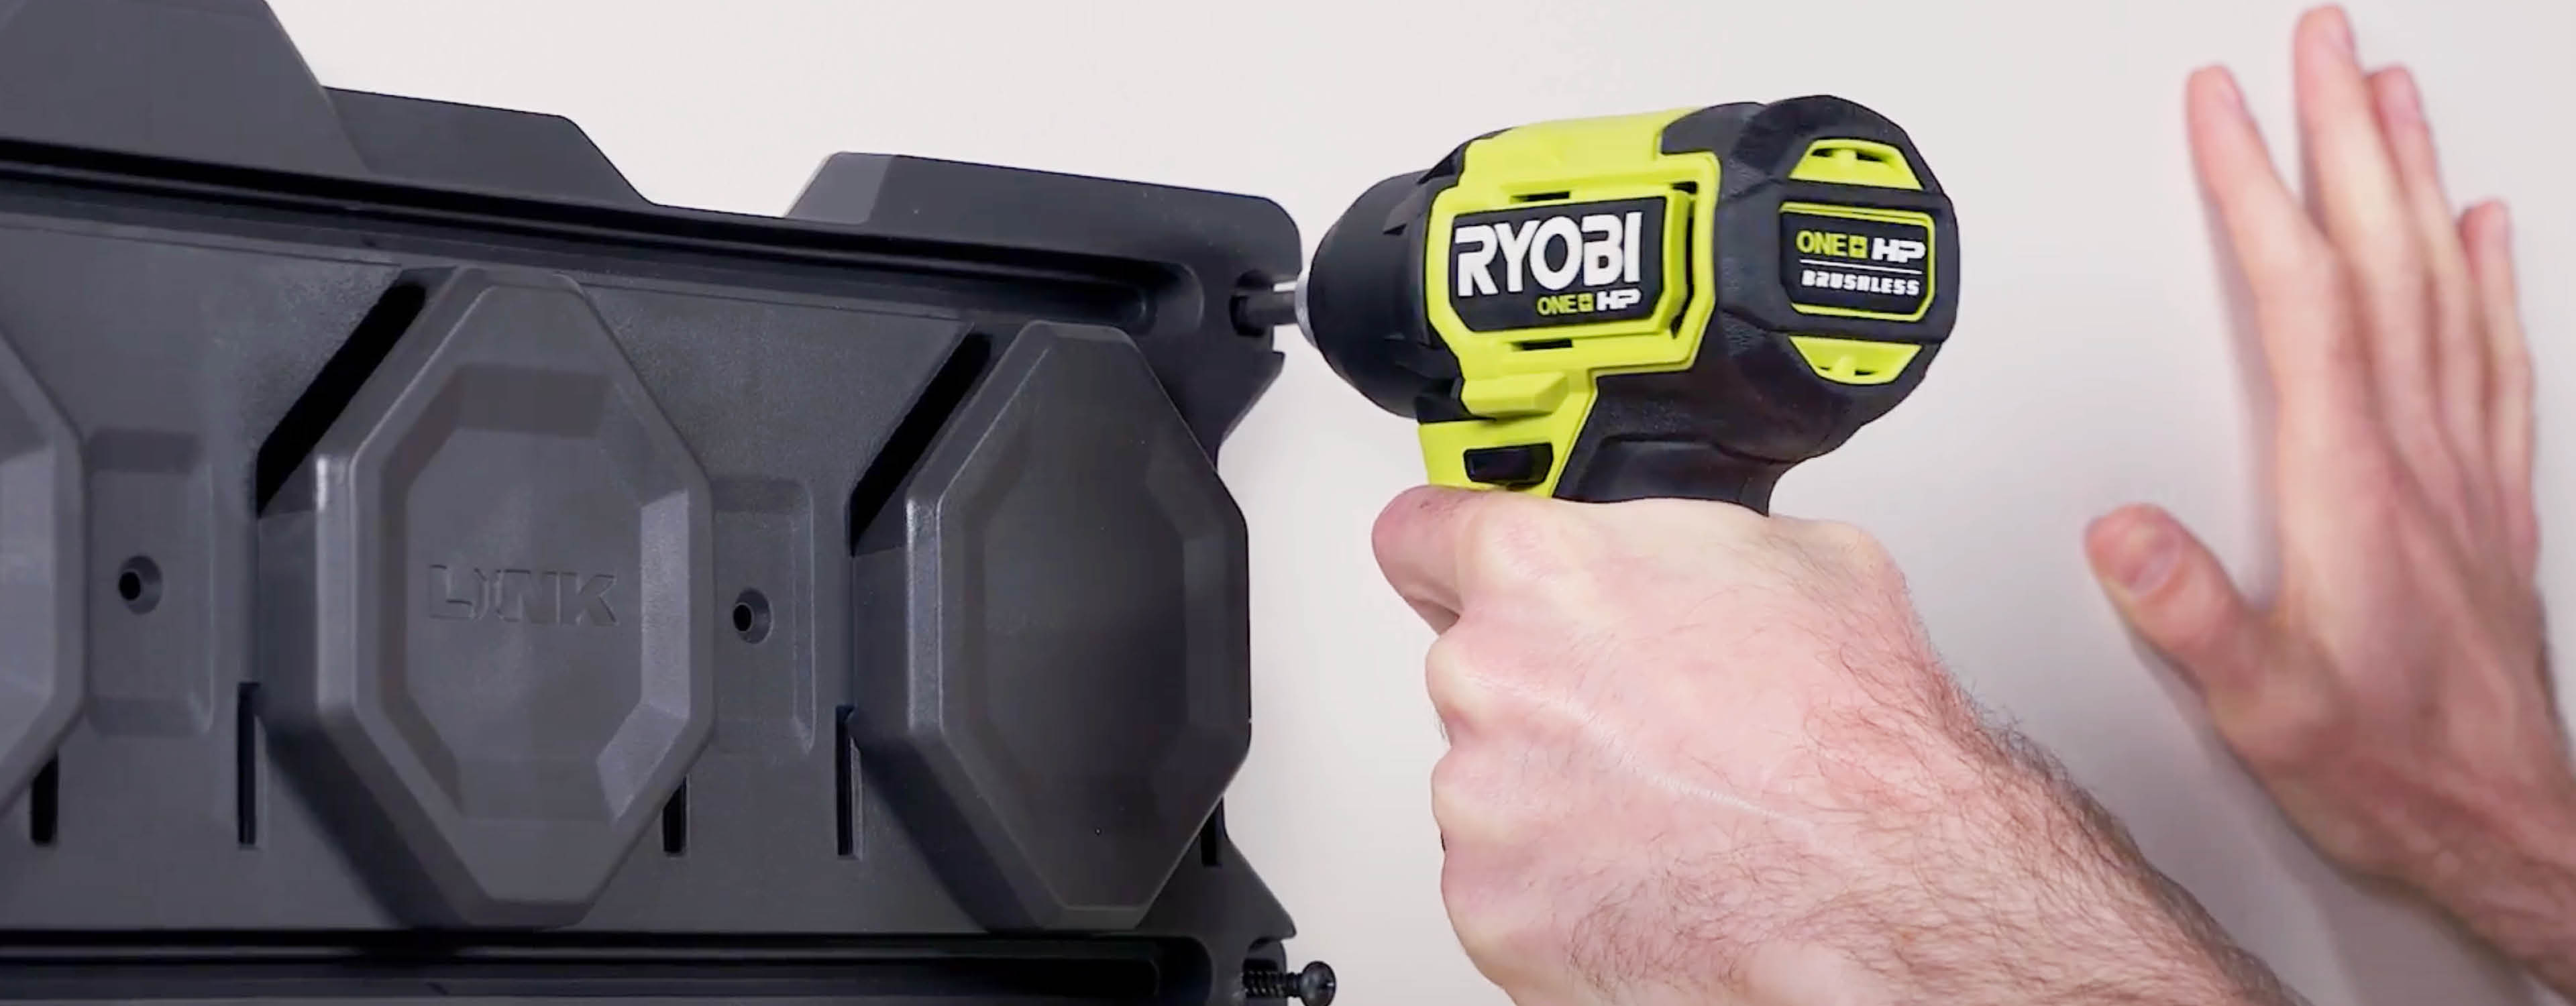 Ryobi LINK rail being installed on a white wall